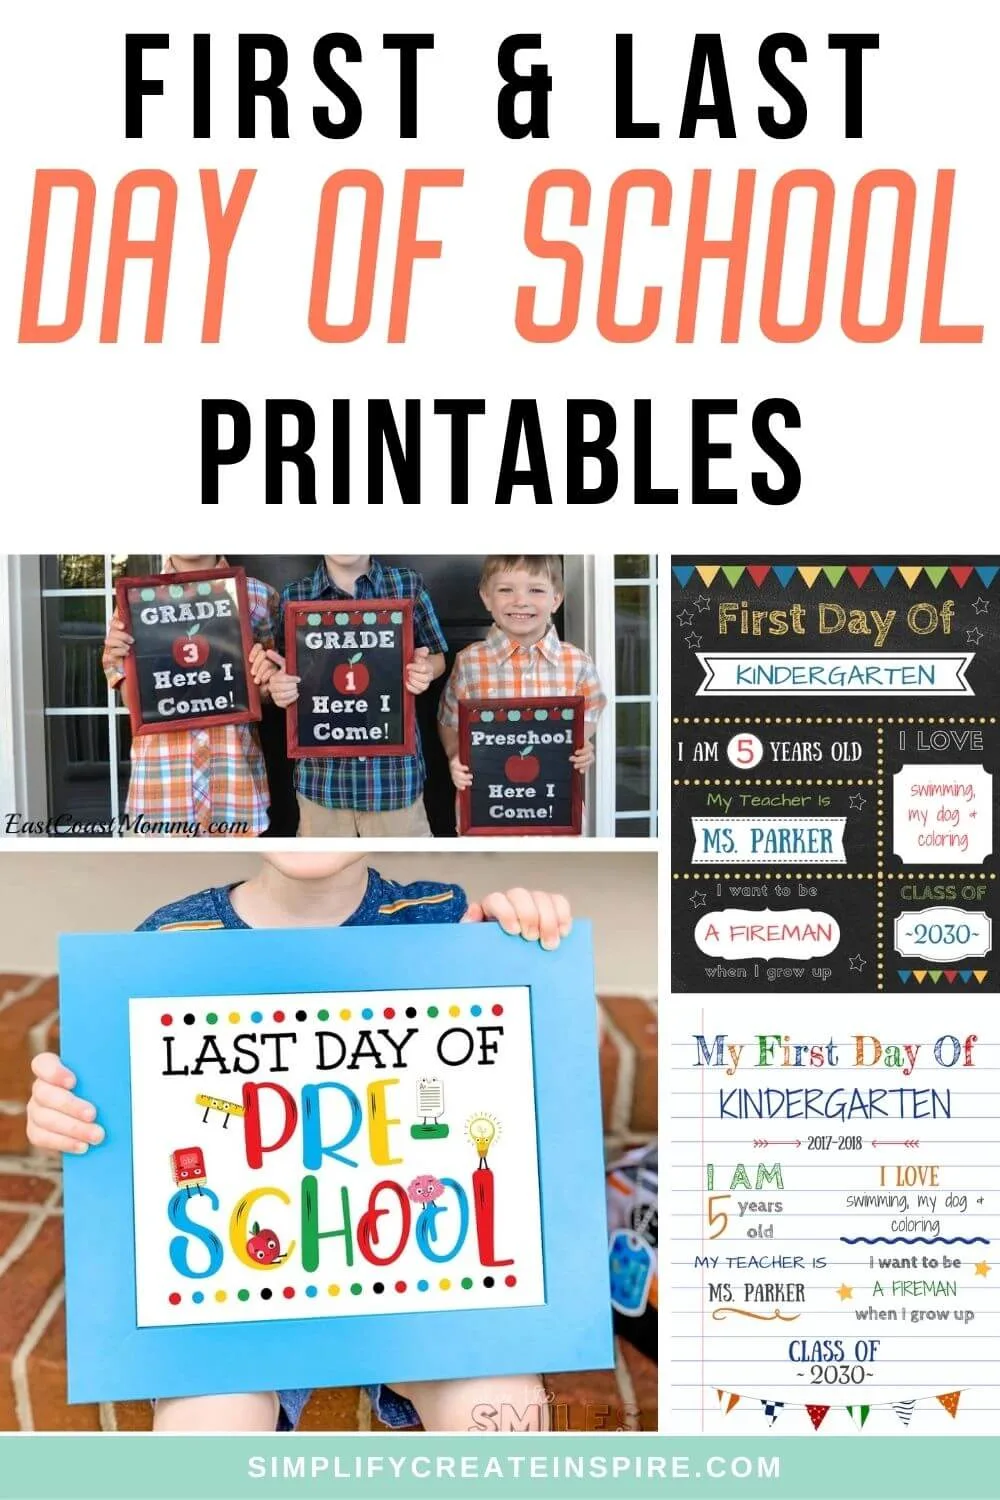 Free first day of school printables and back to school photos